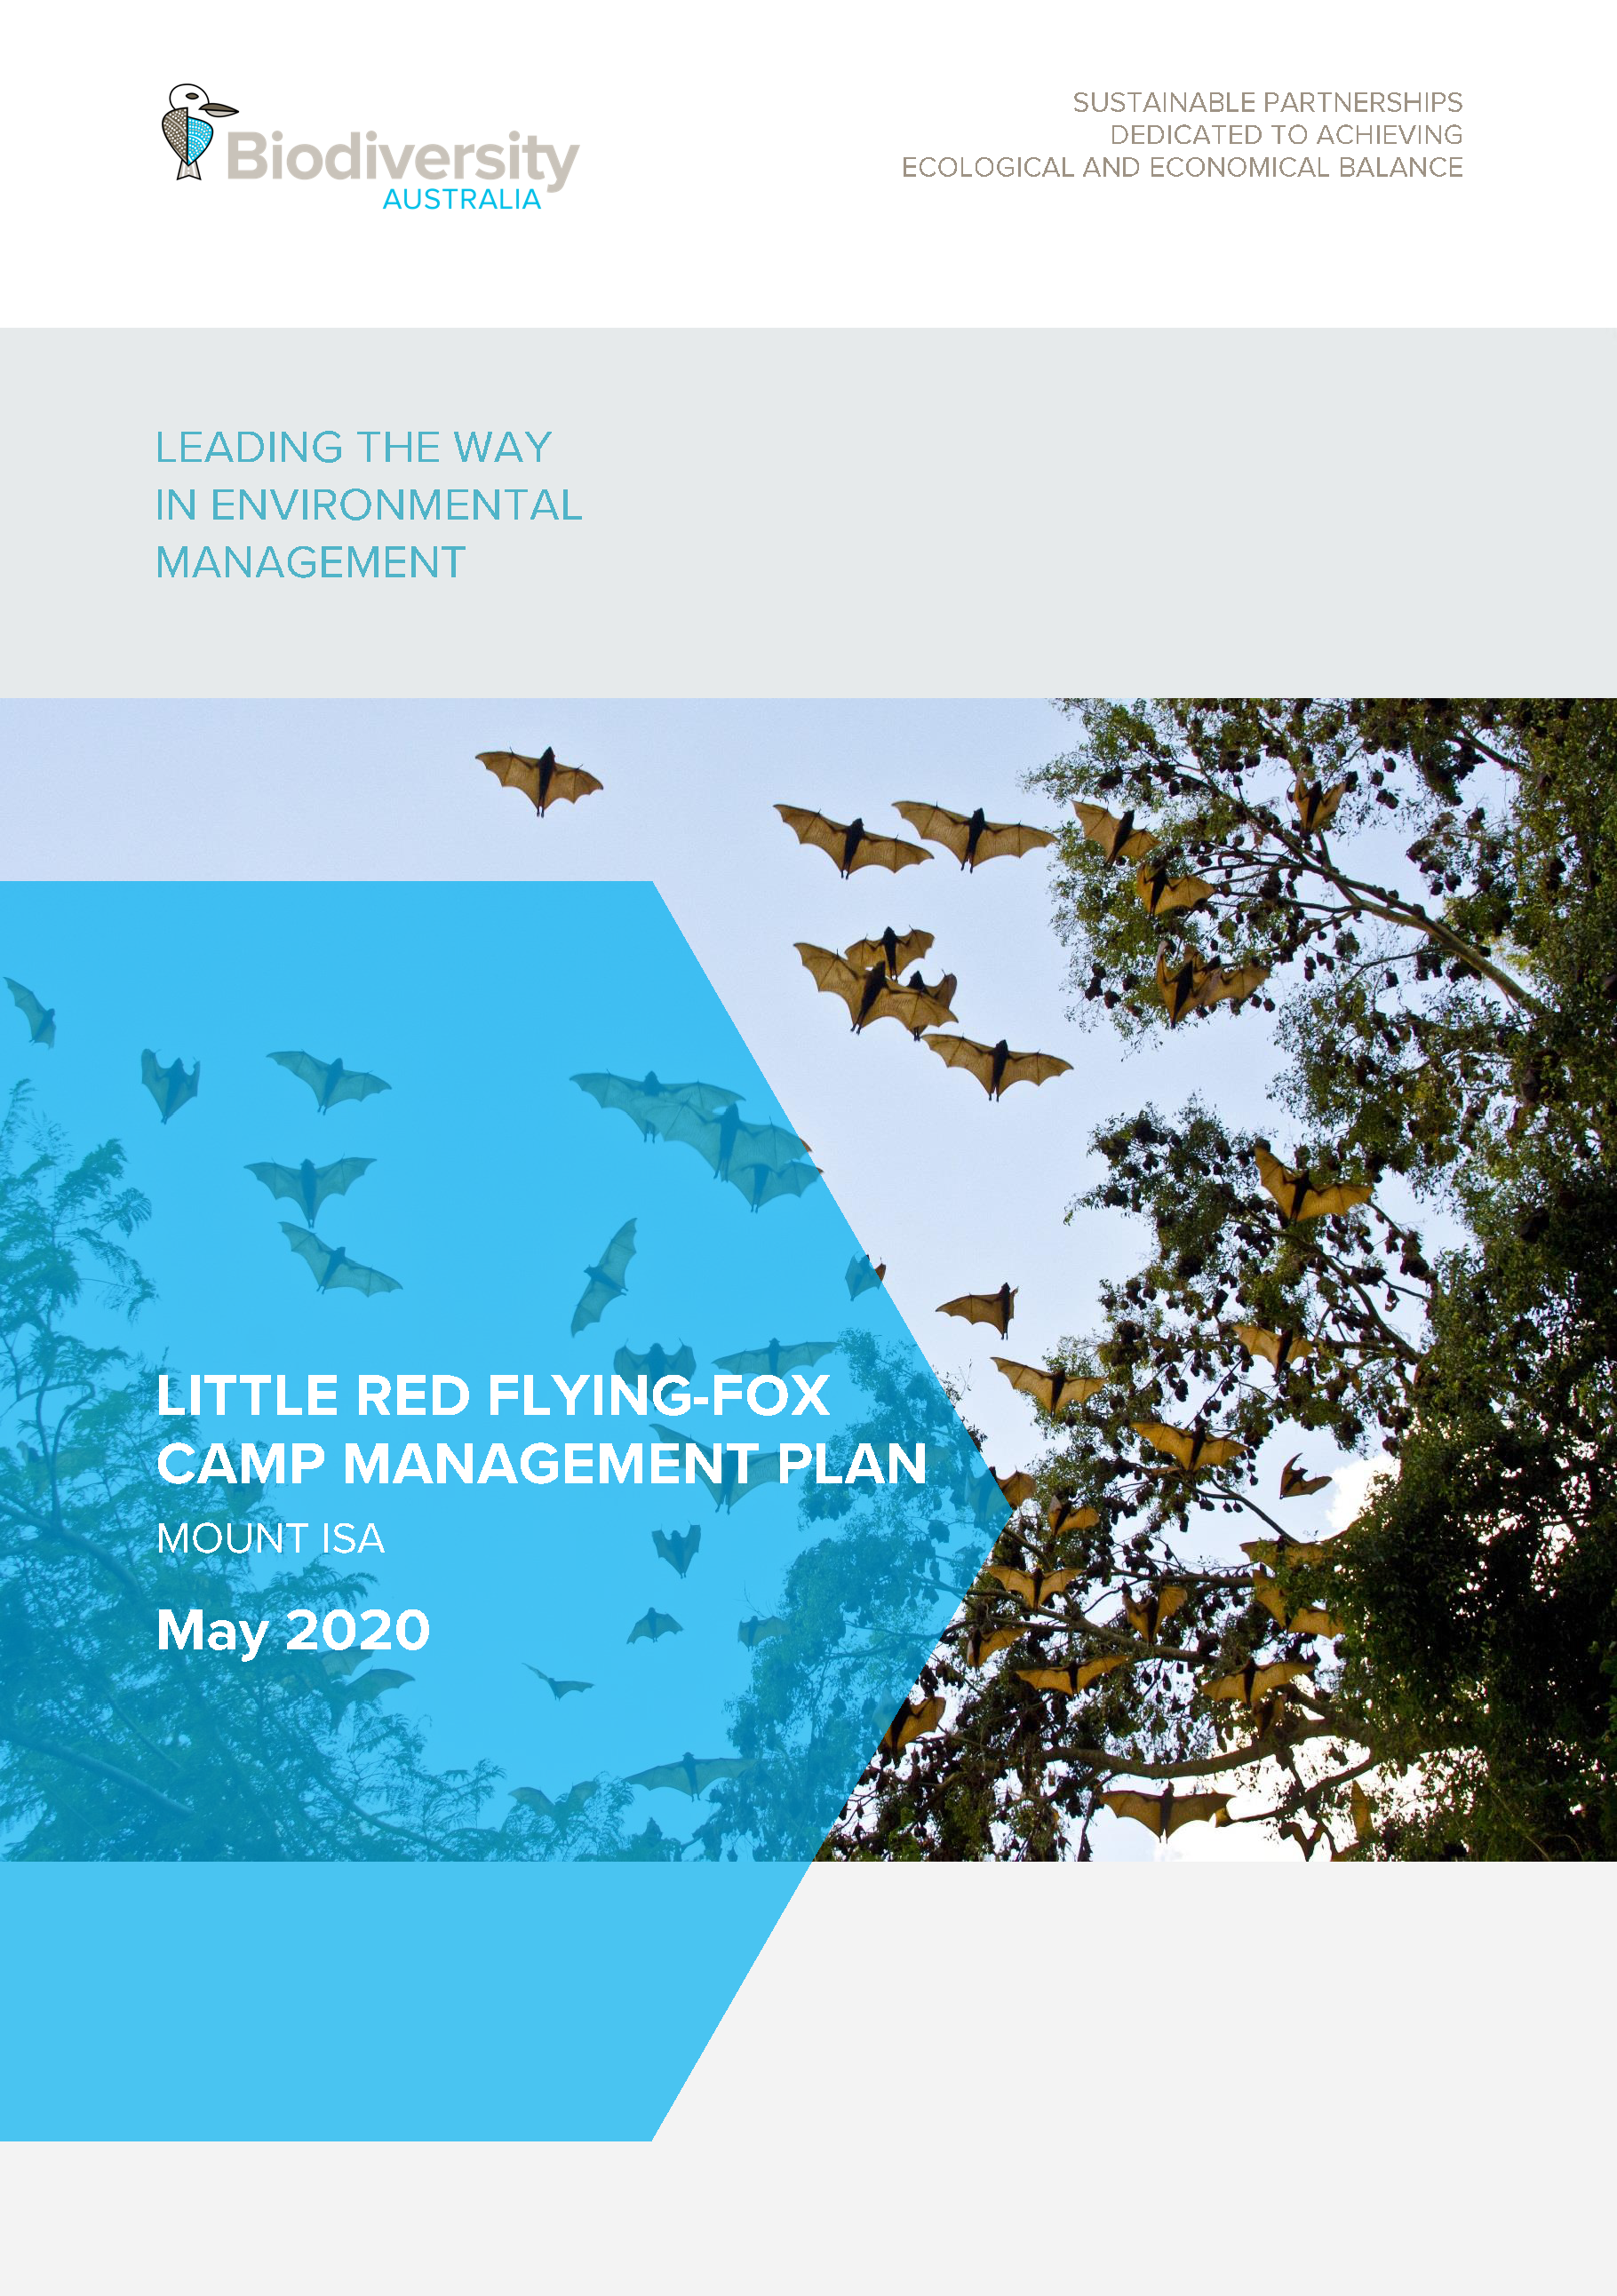 Mount Isa Little Red Flying Fox Camp Management Plan and Feasibility Study